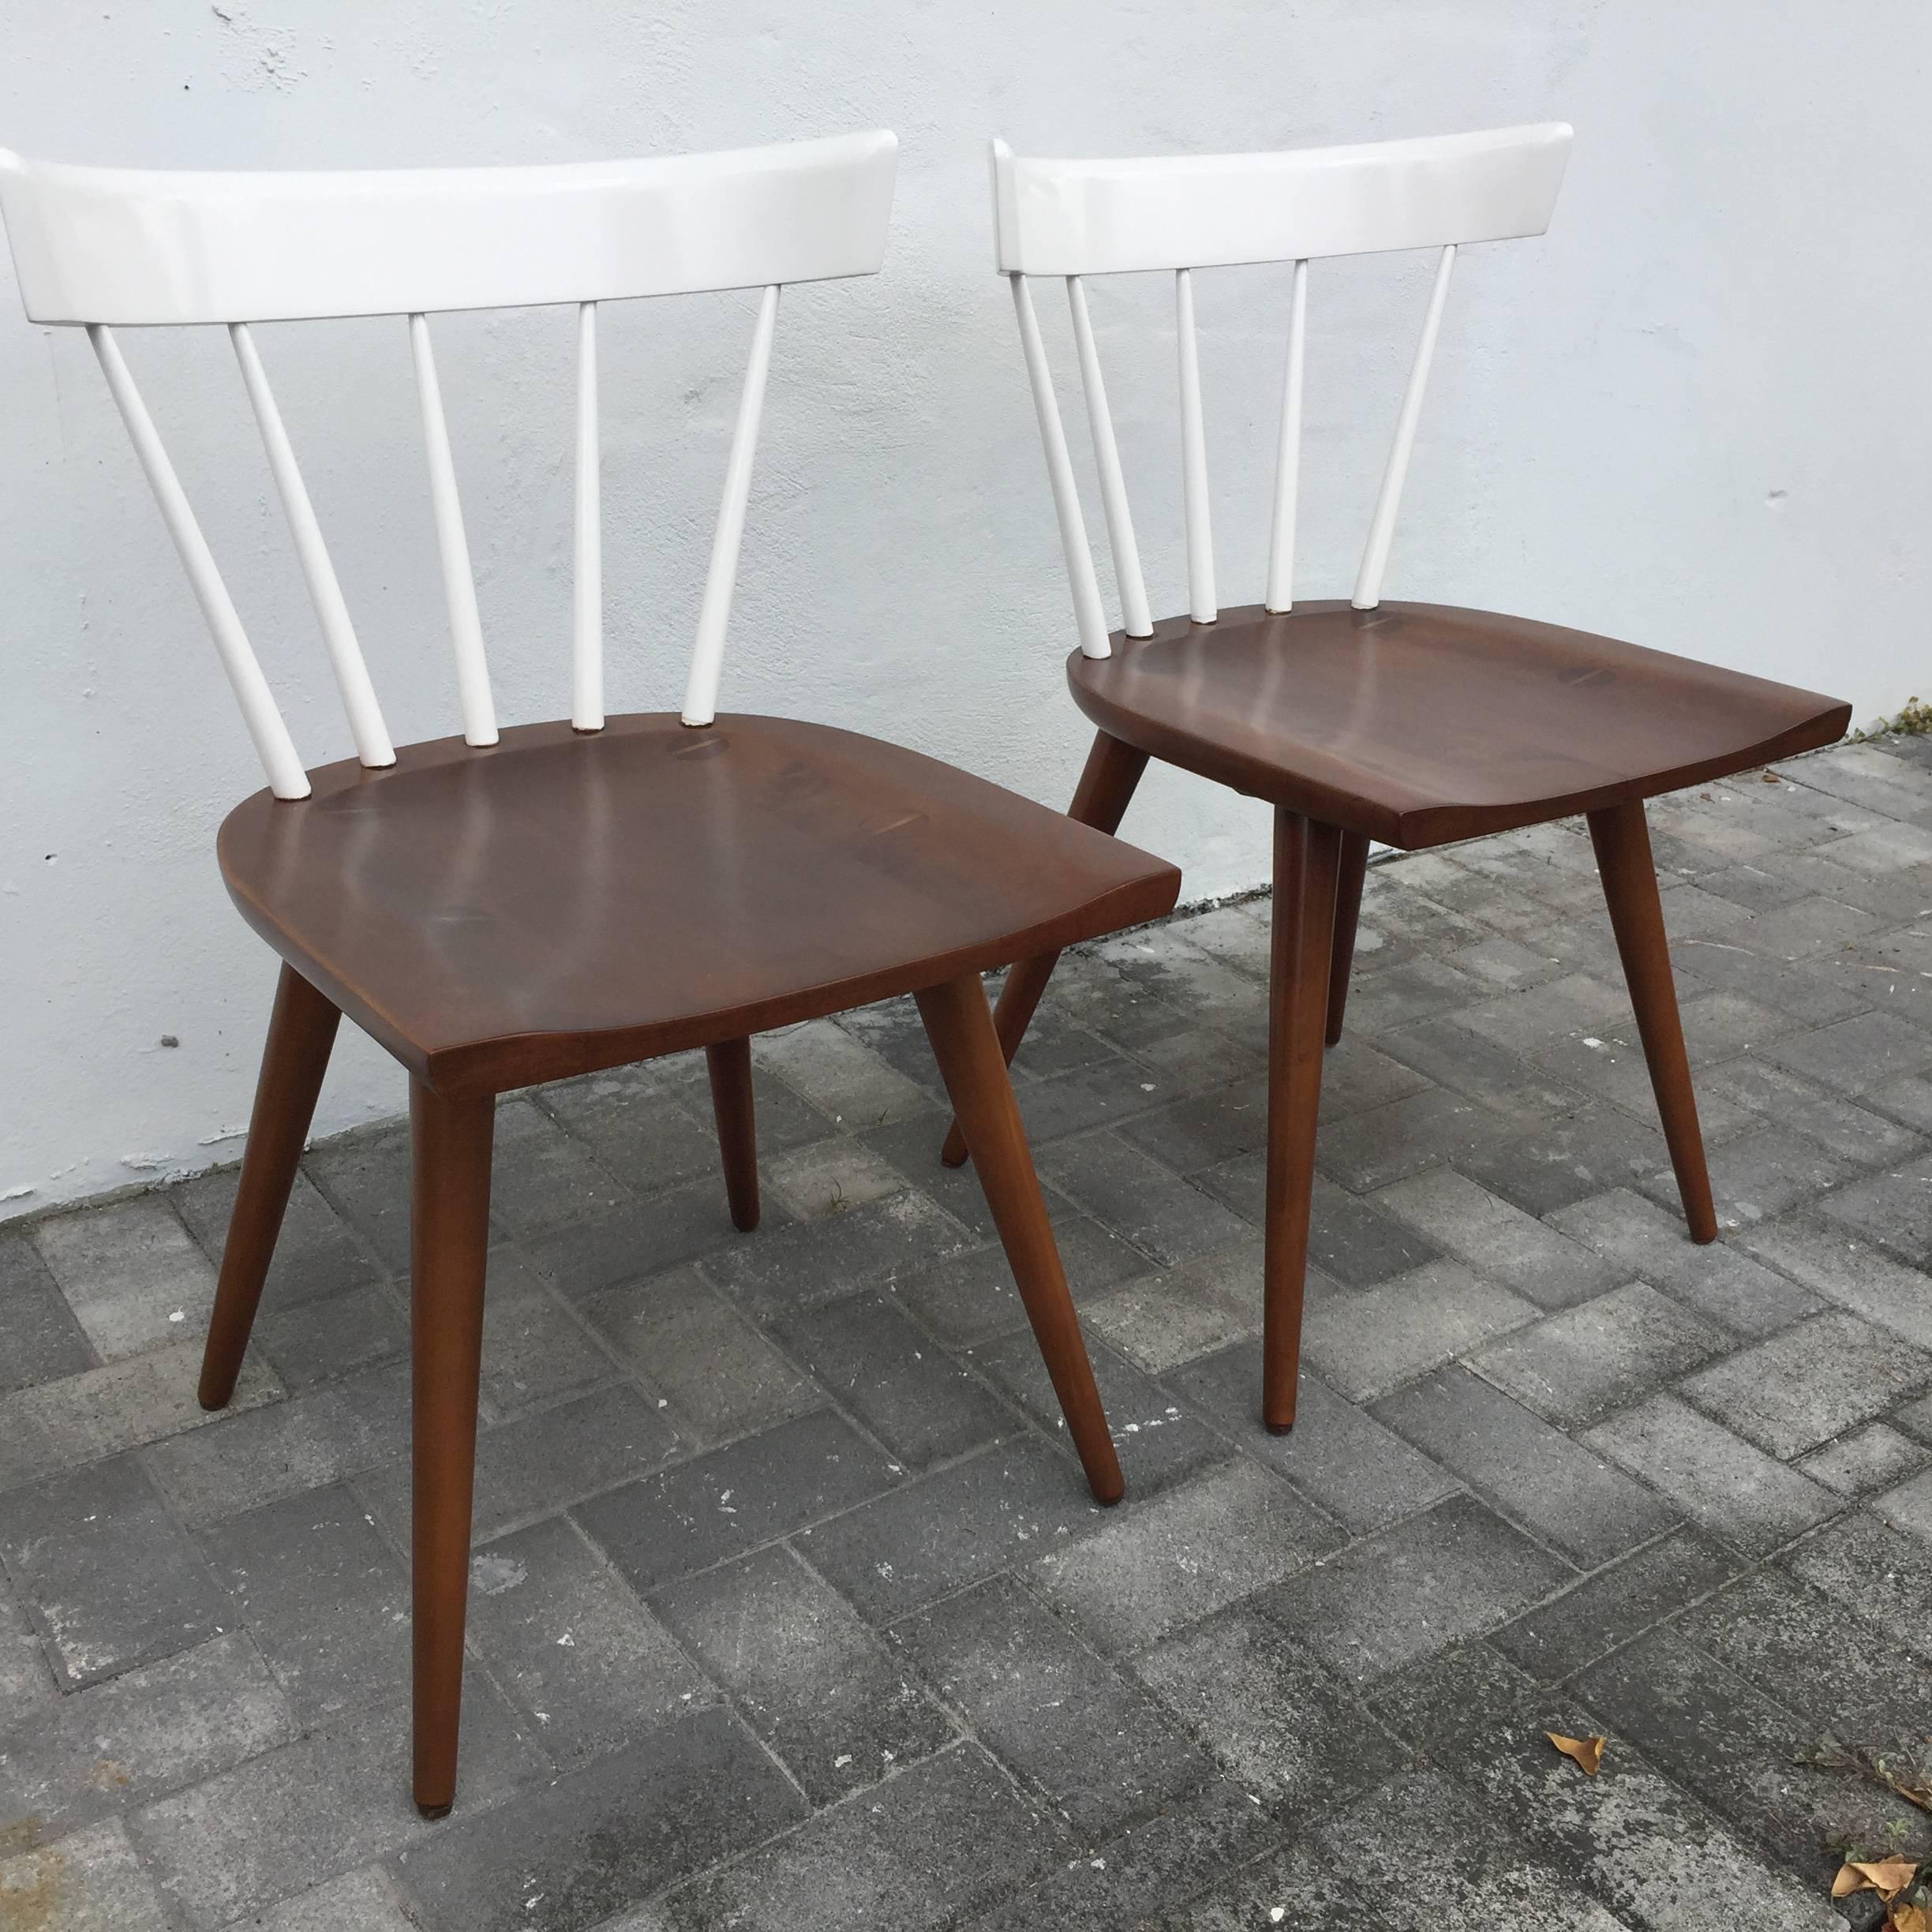 This is a pair of two-toned, white and brown stained wood, Planner chairs designed by Paul McCobb. There is a second pair of McCobb chairs in similar two-tone that would complement beautifully as a set of four chairs. See detailed images.